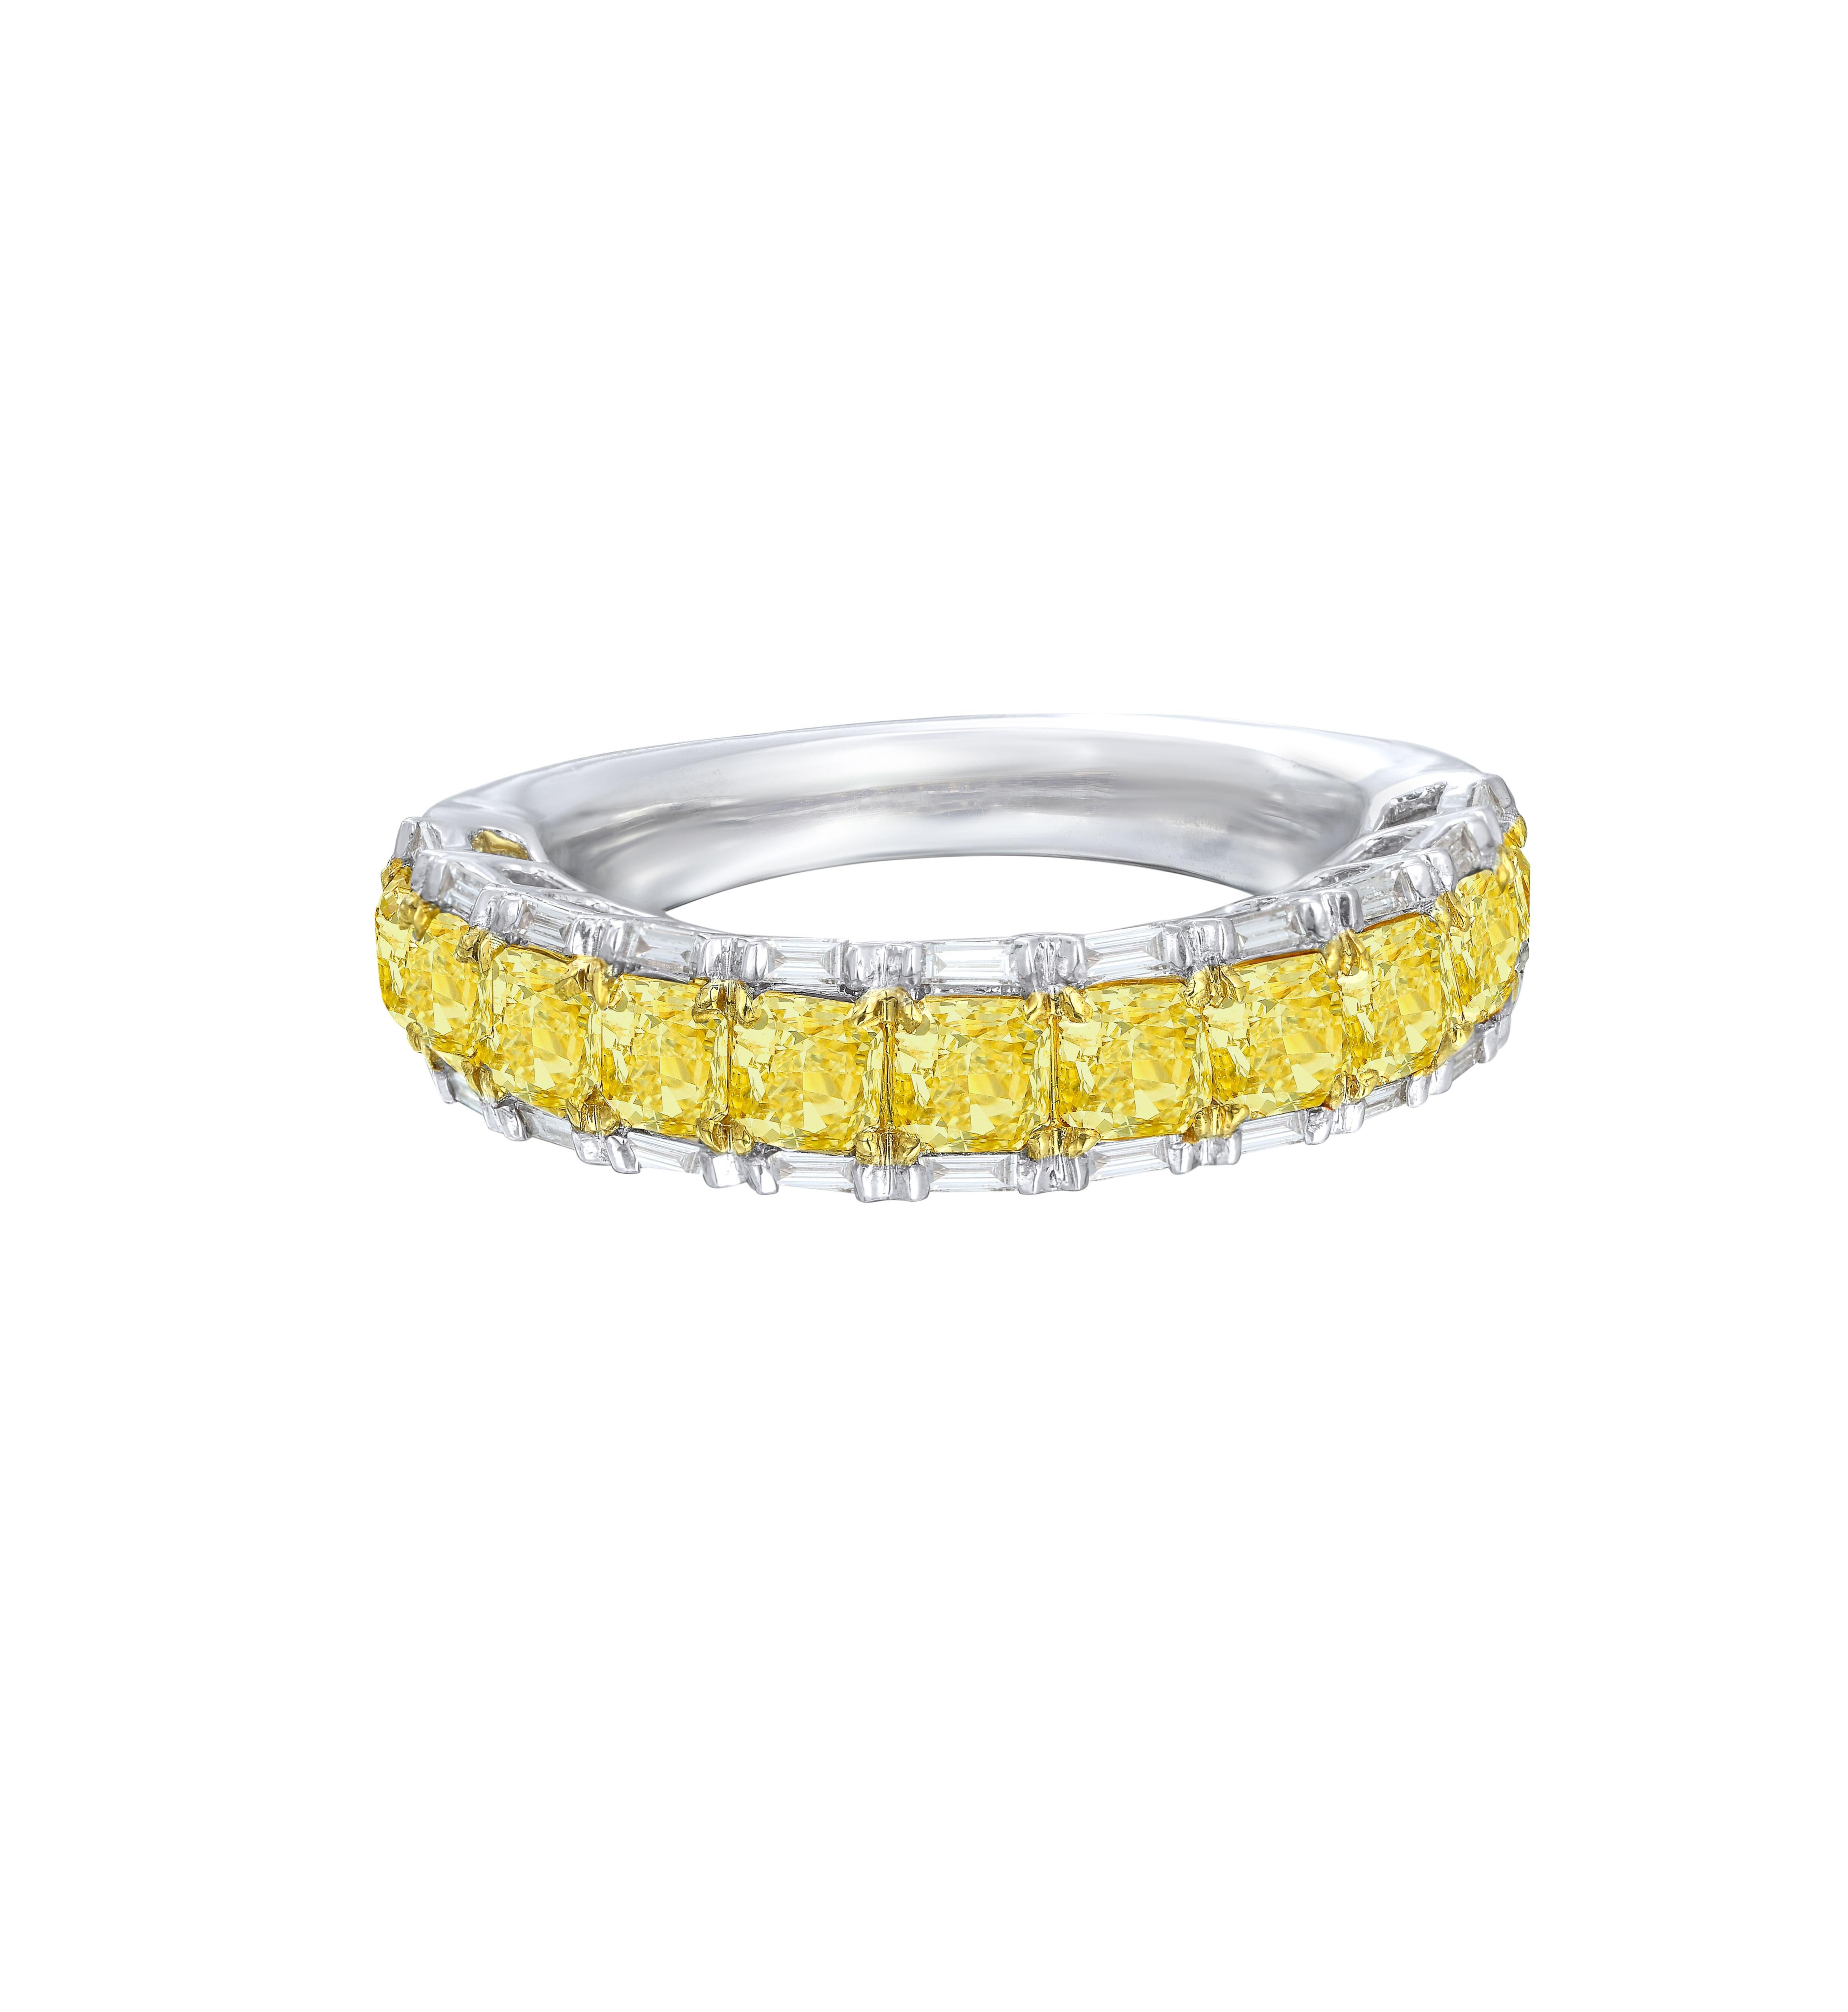 Modern Eternity Band Half with Baguettes, 2.05 Carat